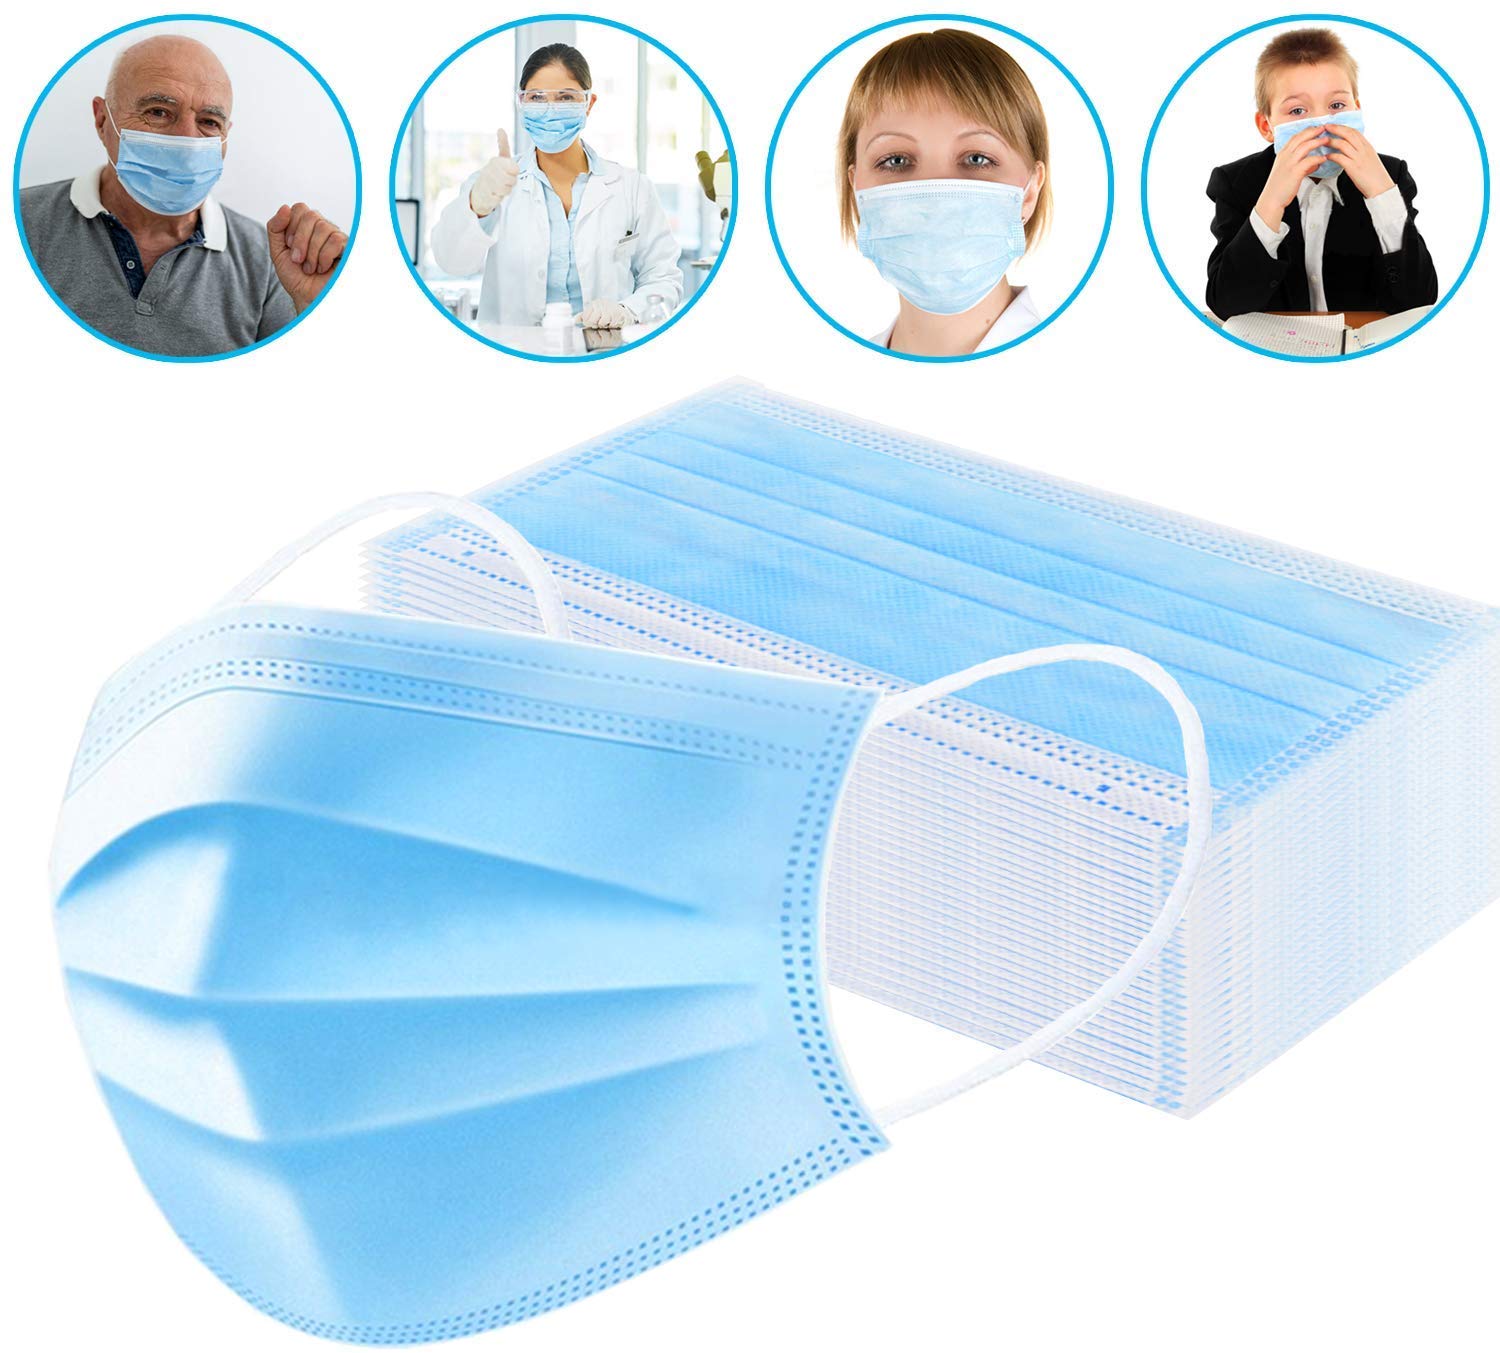 50pcs Disposable Face Mask 3ply Flu1 Hygiene Masks With Elastic Ear Loops Ebay